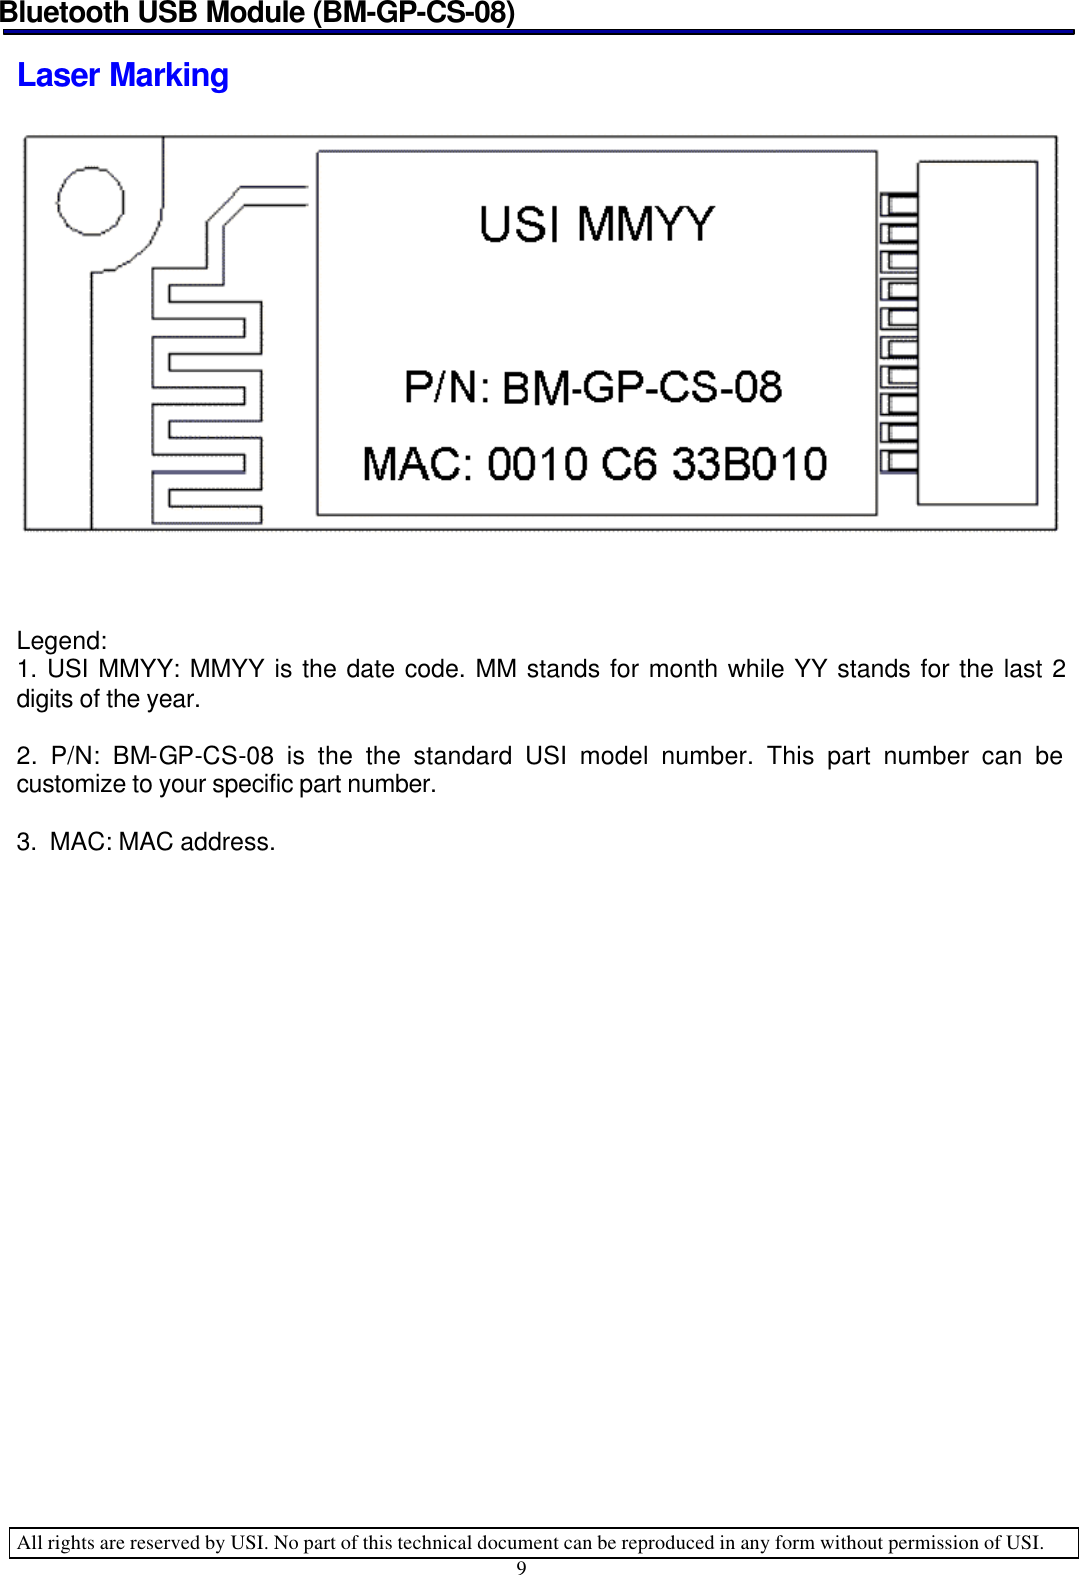 Bluetooth USB Module (BM-GP-CS-08)   All rights are reserved by USI. No part of this technical document can be reproduced in any form without permission of USI. 9  Laser Marking      Legend: 1. USI MMYY: MMYY is the date code. MM stands for month while YY stands for the last 2 digits of the year.  2. P/N: BM-GP-CS-08 is the the standard USI model number. This part number can be customize to your specific part number.  3.  MAC: MAC address.            